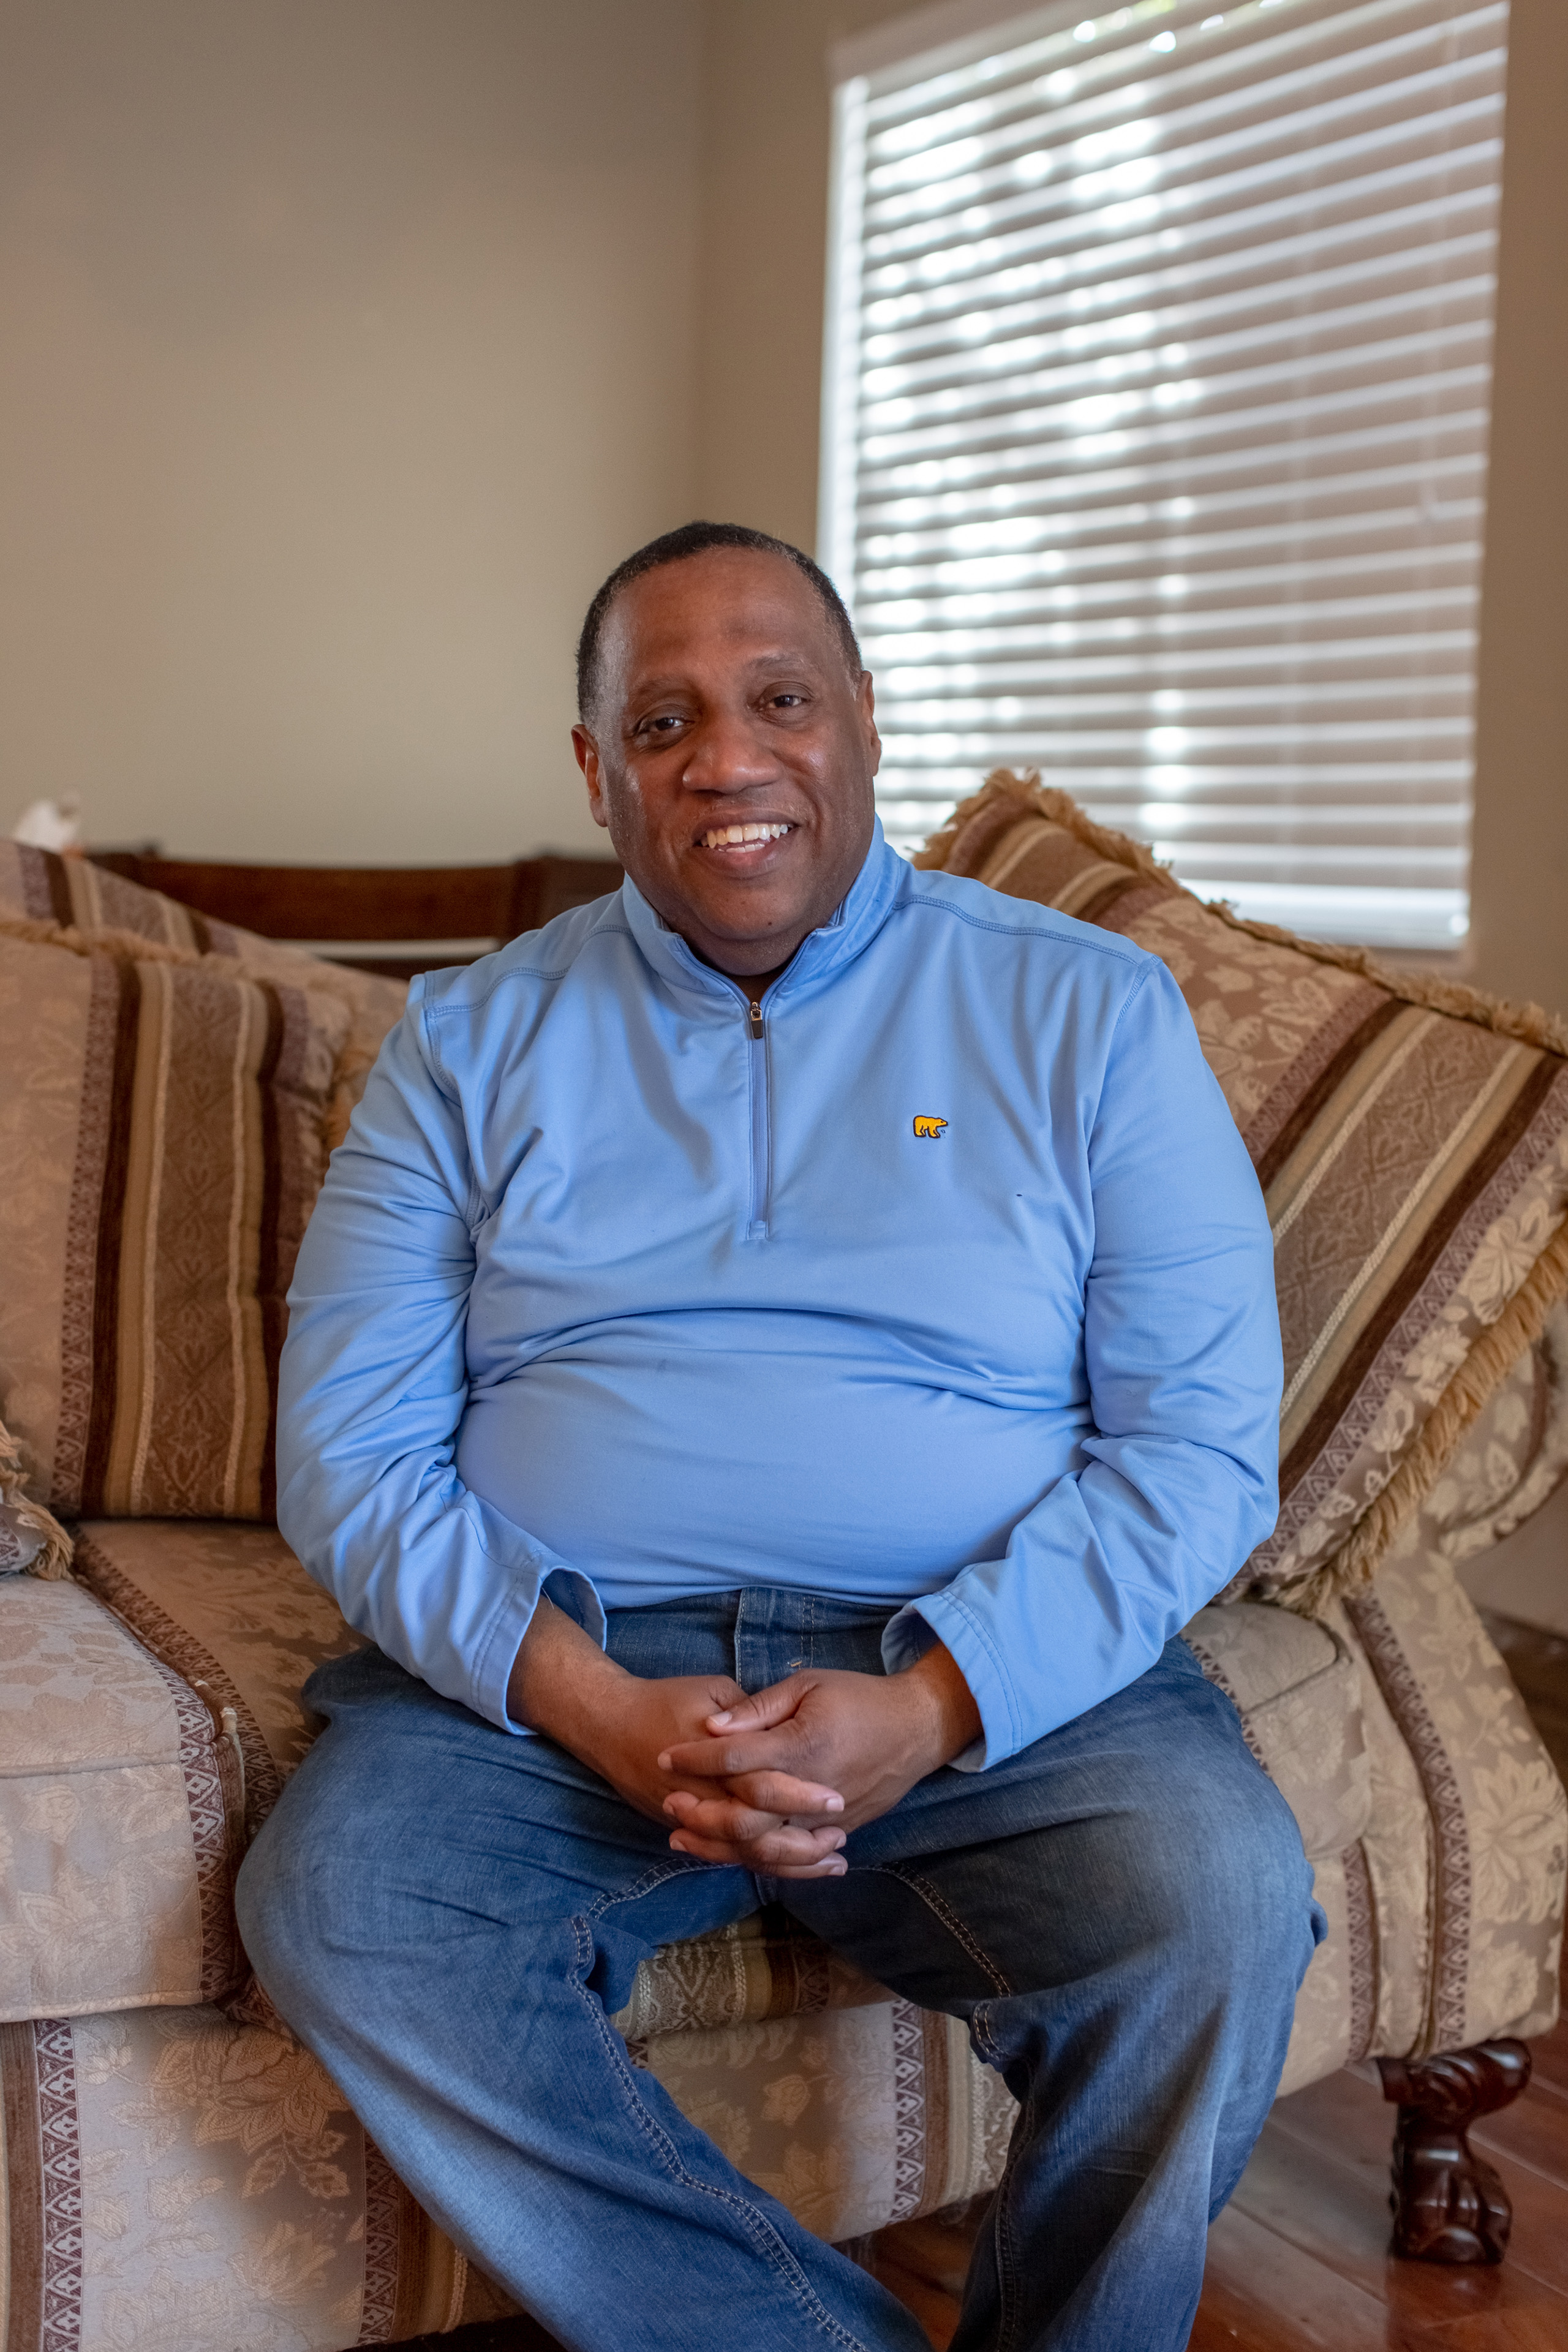 Ovester Armstrong Jr. sits on a couch in his home and holds his hands in his lap. He is looking directly towards the camera and smiling broadly.